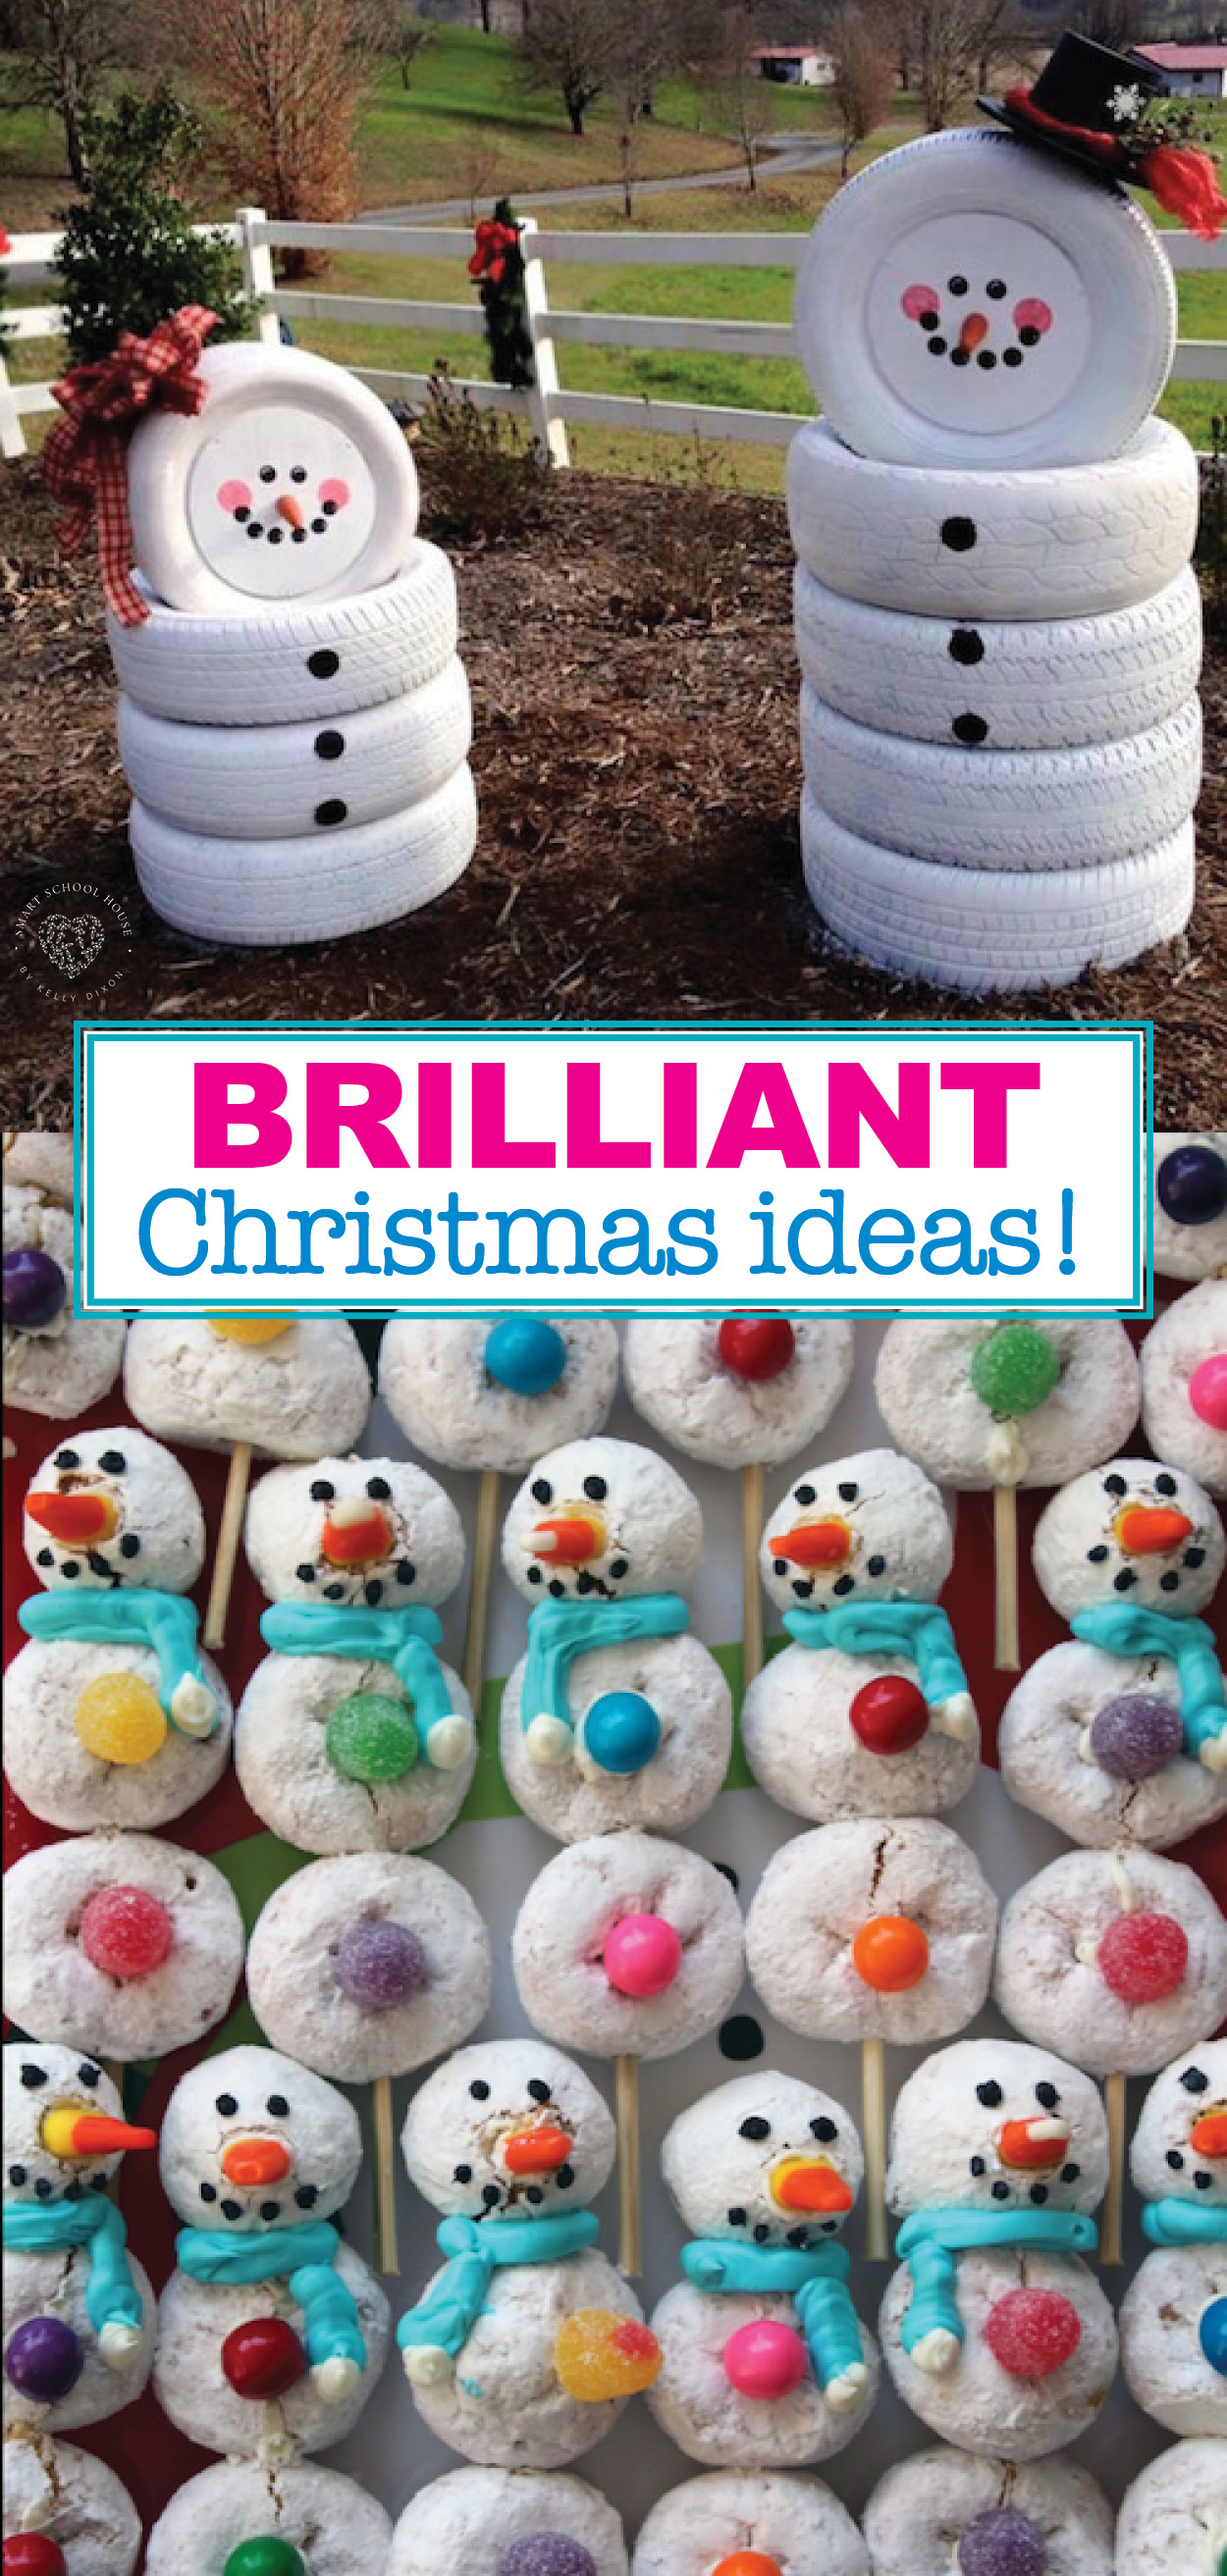 Brilliant and Exciting Christmas Ideas! Crafts, recipes, and DIY ideas for the whole family.